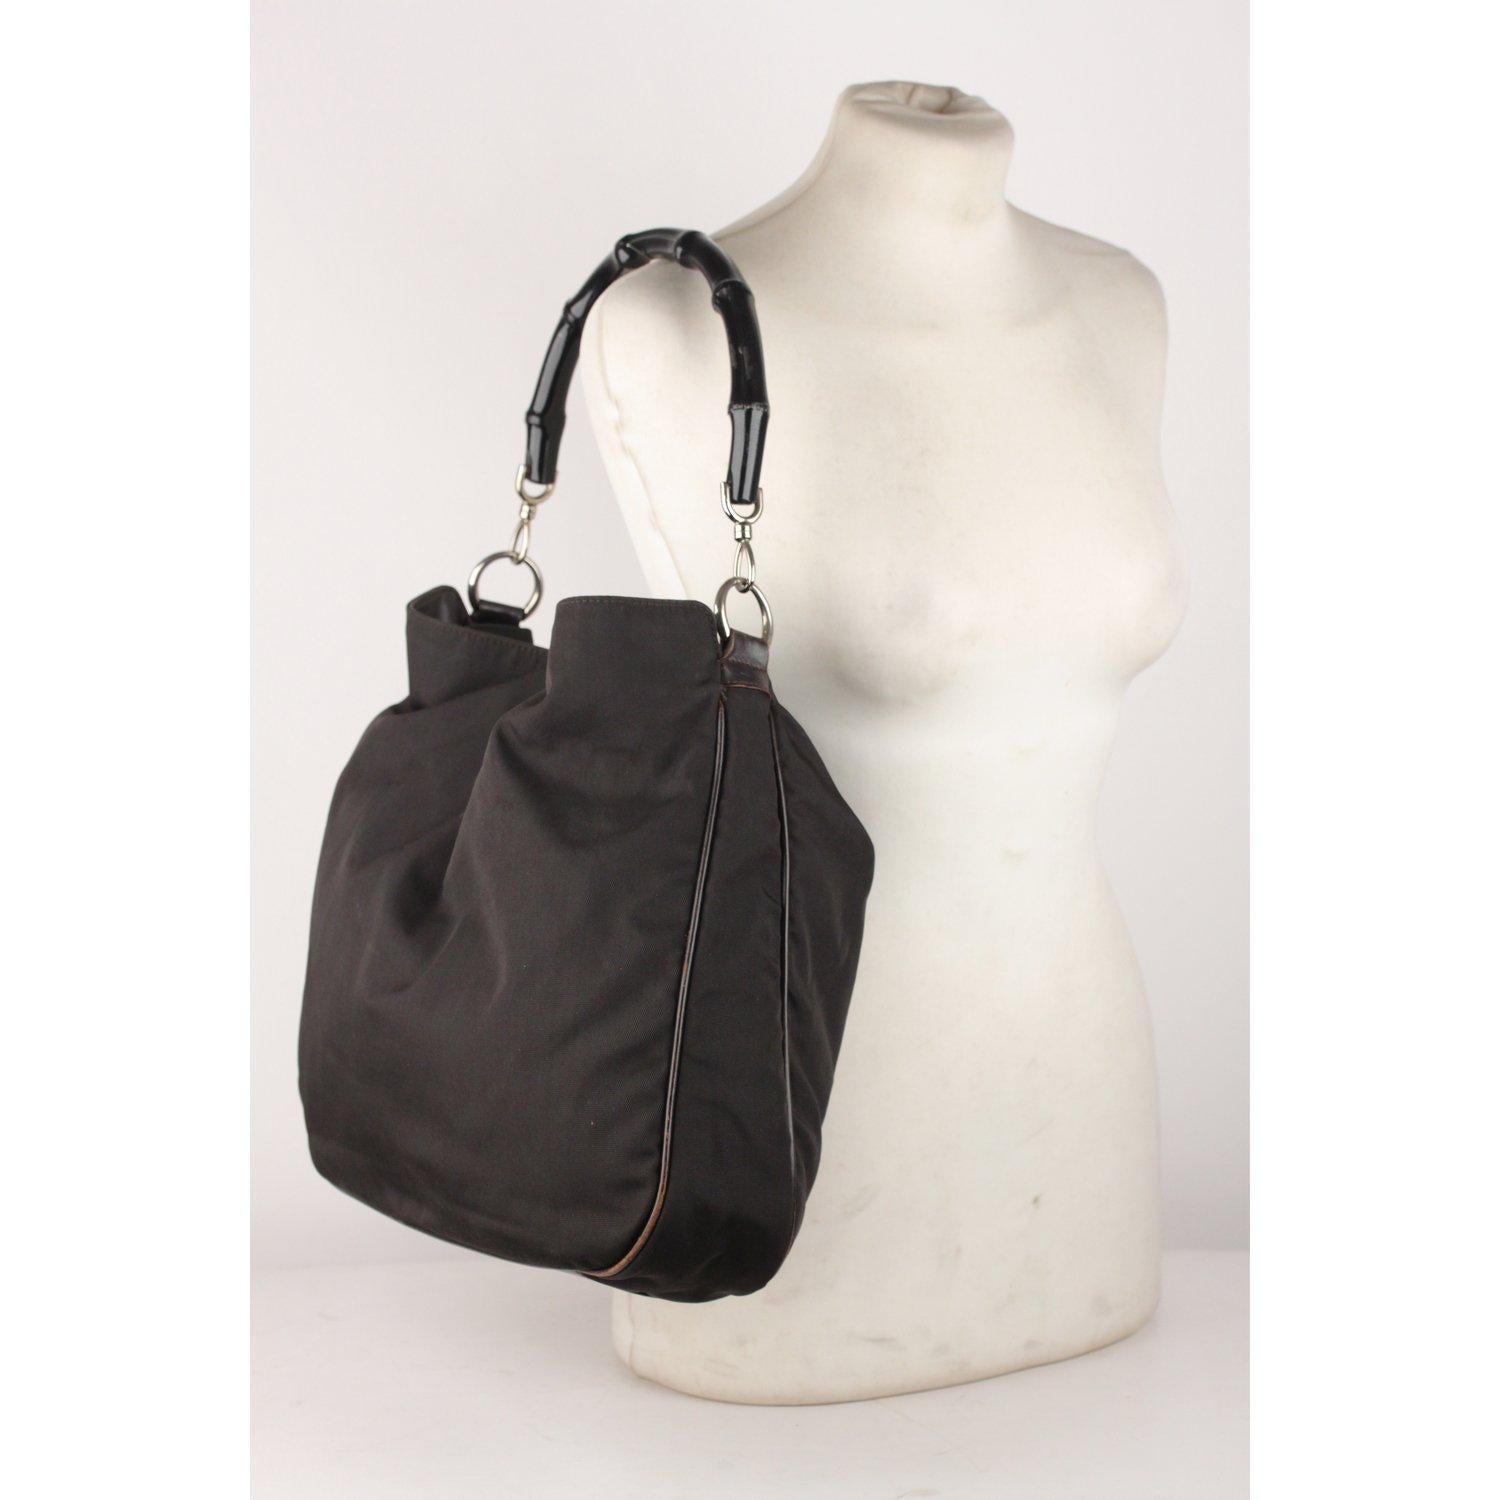 MATERIAL: Canvas COLOR: Black MODEL: Hobo GENDER: Women SIZE: Medium Condition B :GOOD CONDITION - Some light wear of use - some wear of use on leather trim (especially on bottom corners). Some wear of use on the lining, some marks on the handle